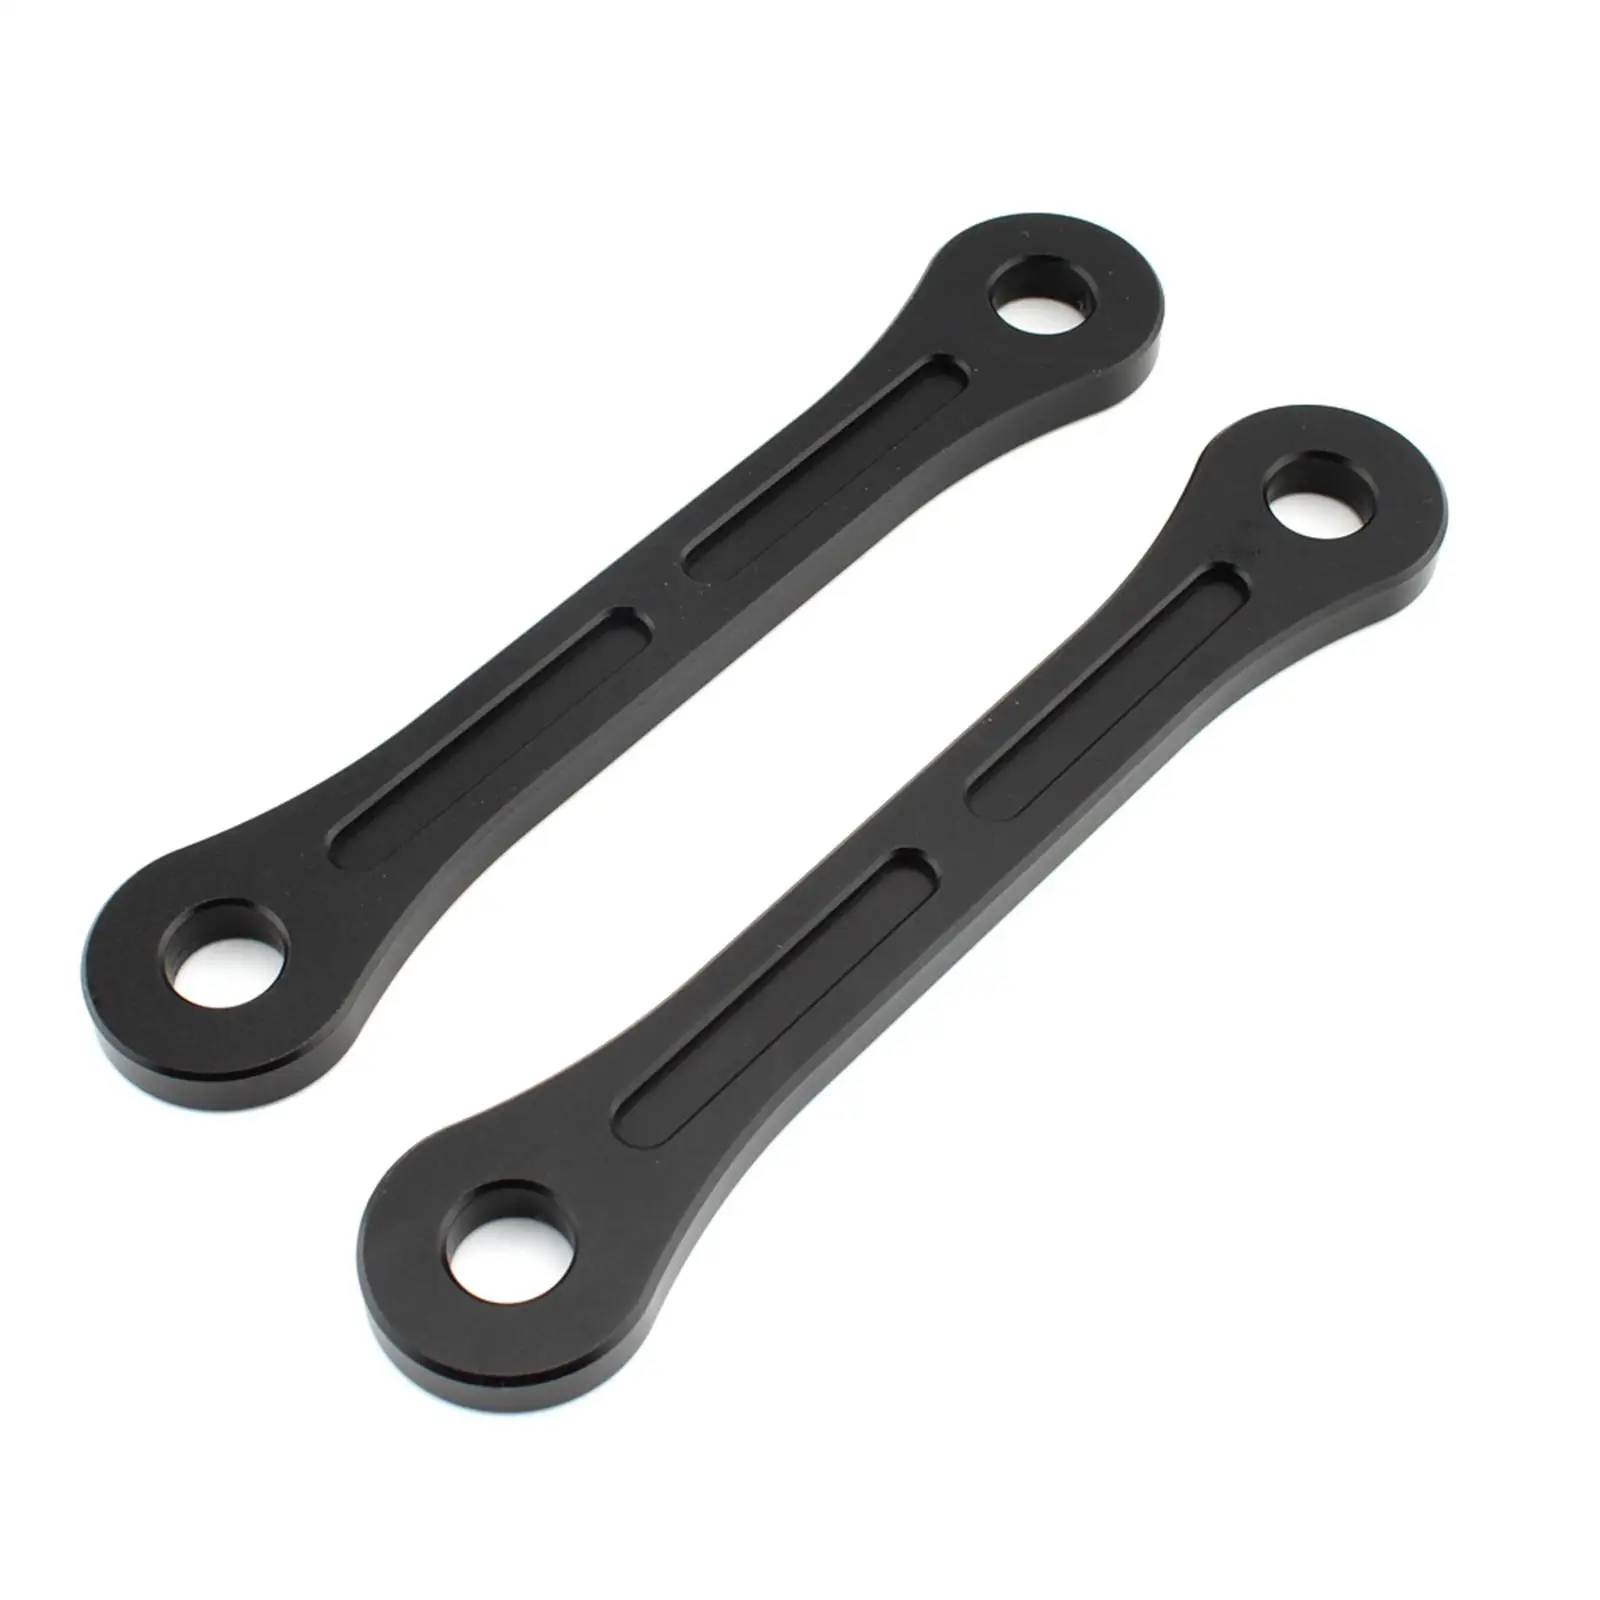 2 Pieces Motorcycle Lowering Link Reinforced Adjustable Accessories for Suzuki